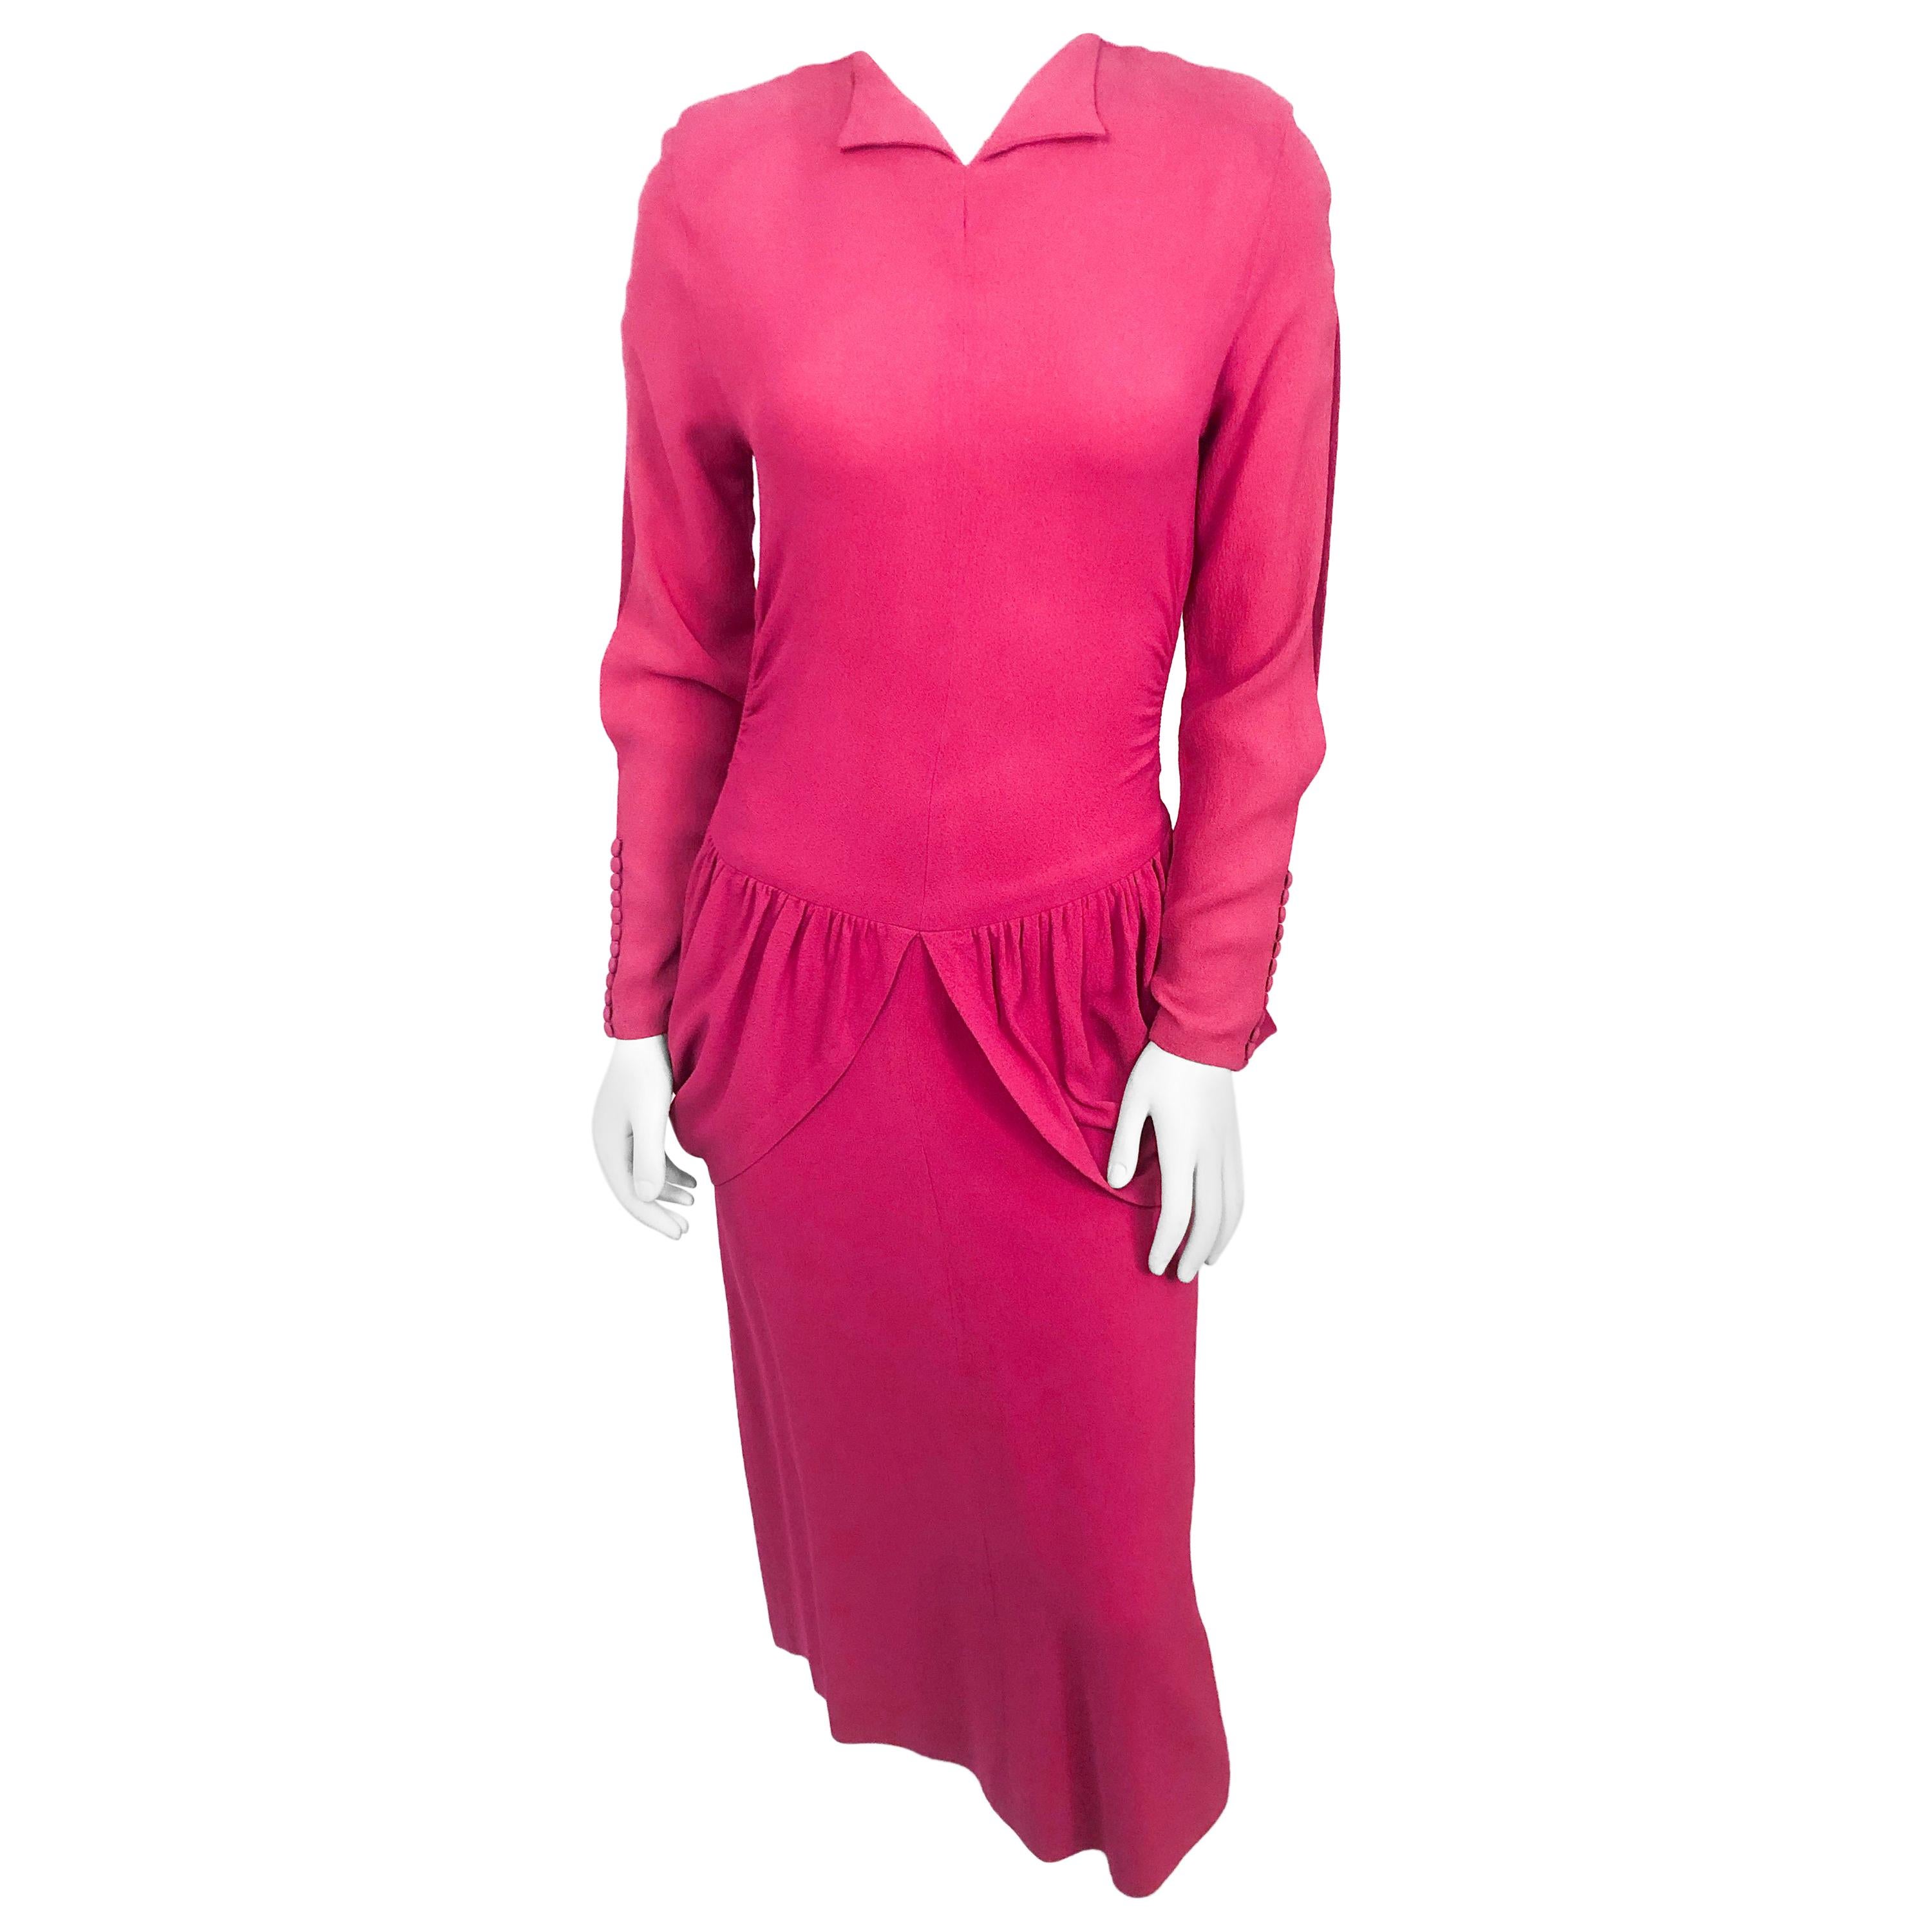 1940s Hot Pink Dress with Flounces and Draped Panels 